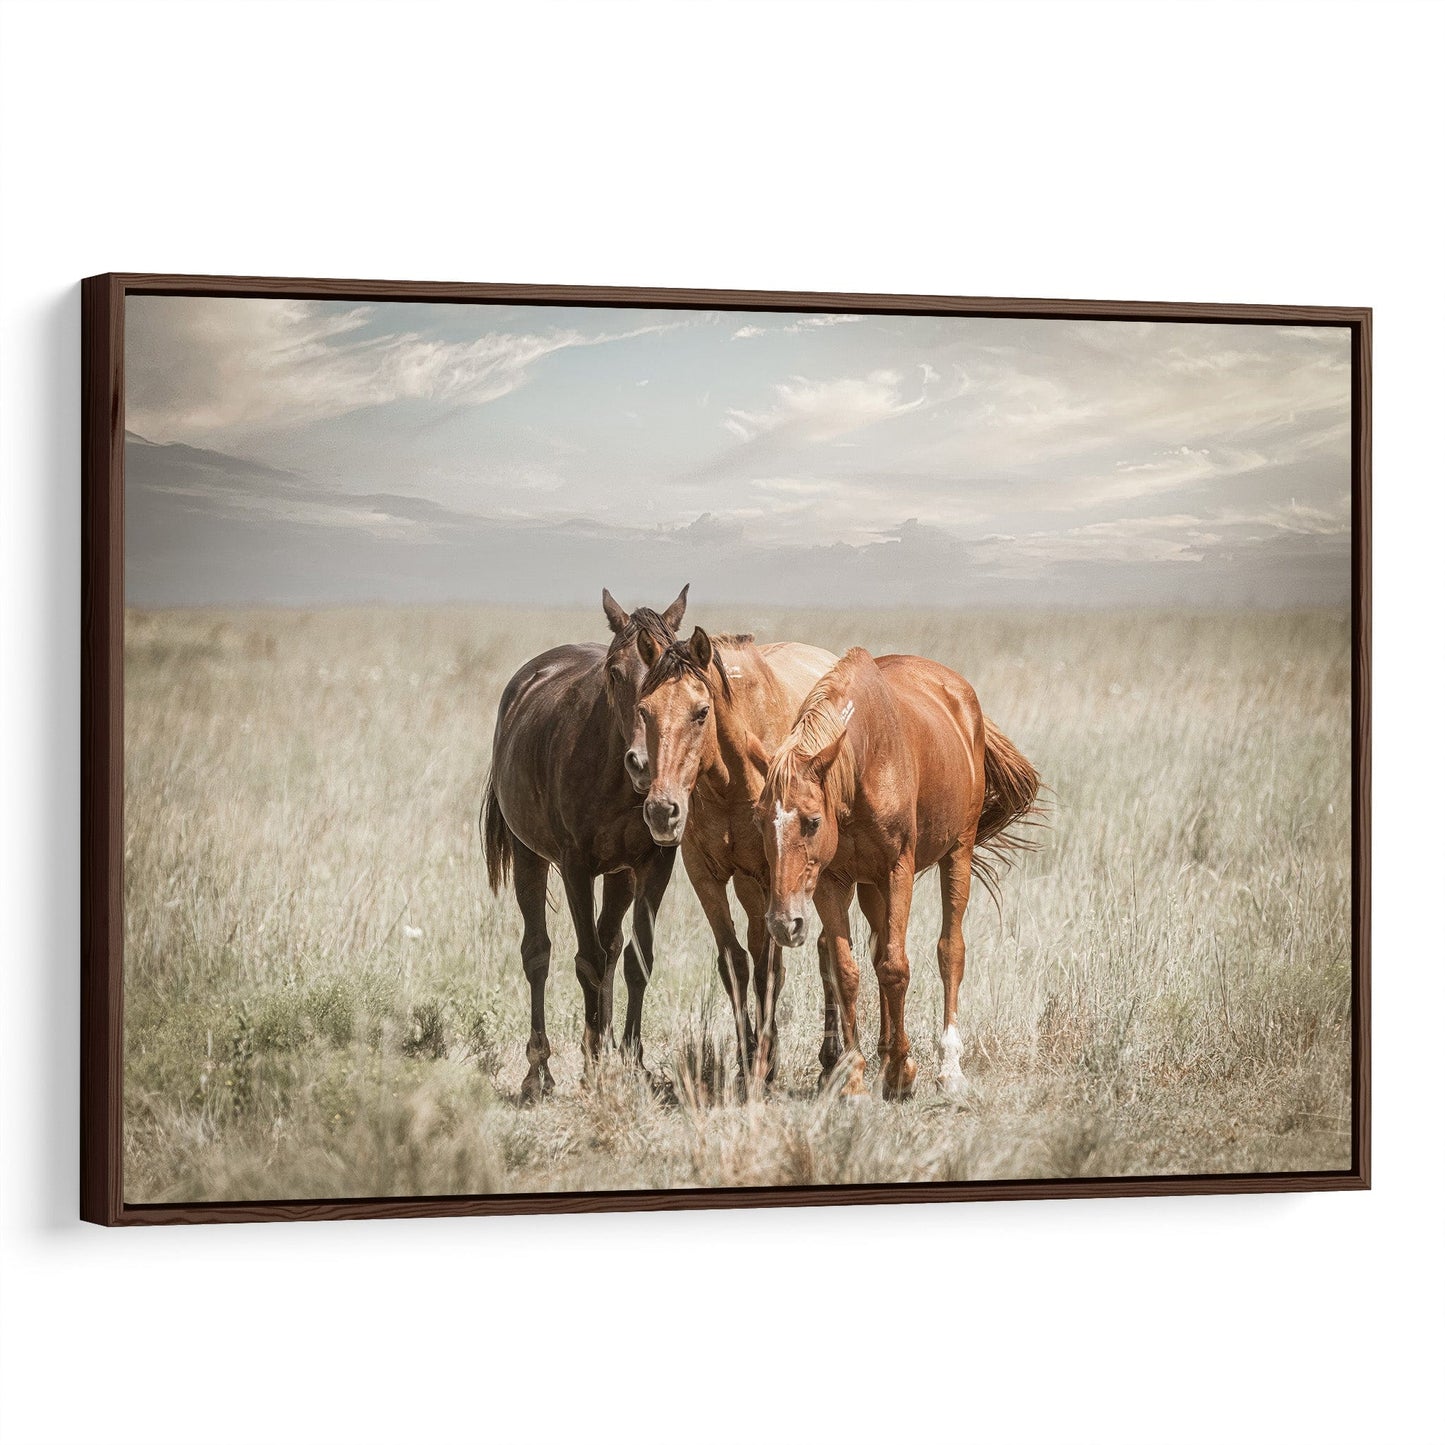 Horse Wall Art Old Friends on the Osage Canvas-Walnut Frame / 12 x 18 Inches Wall Art Teri James Photography